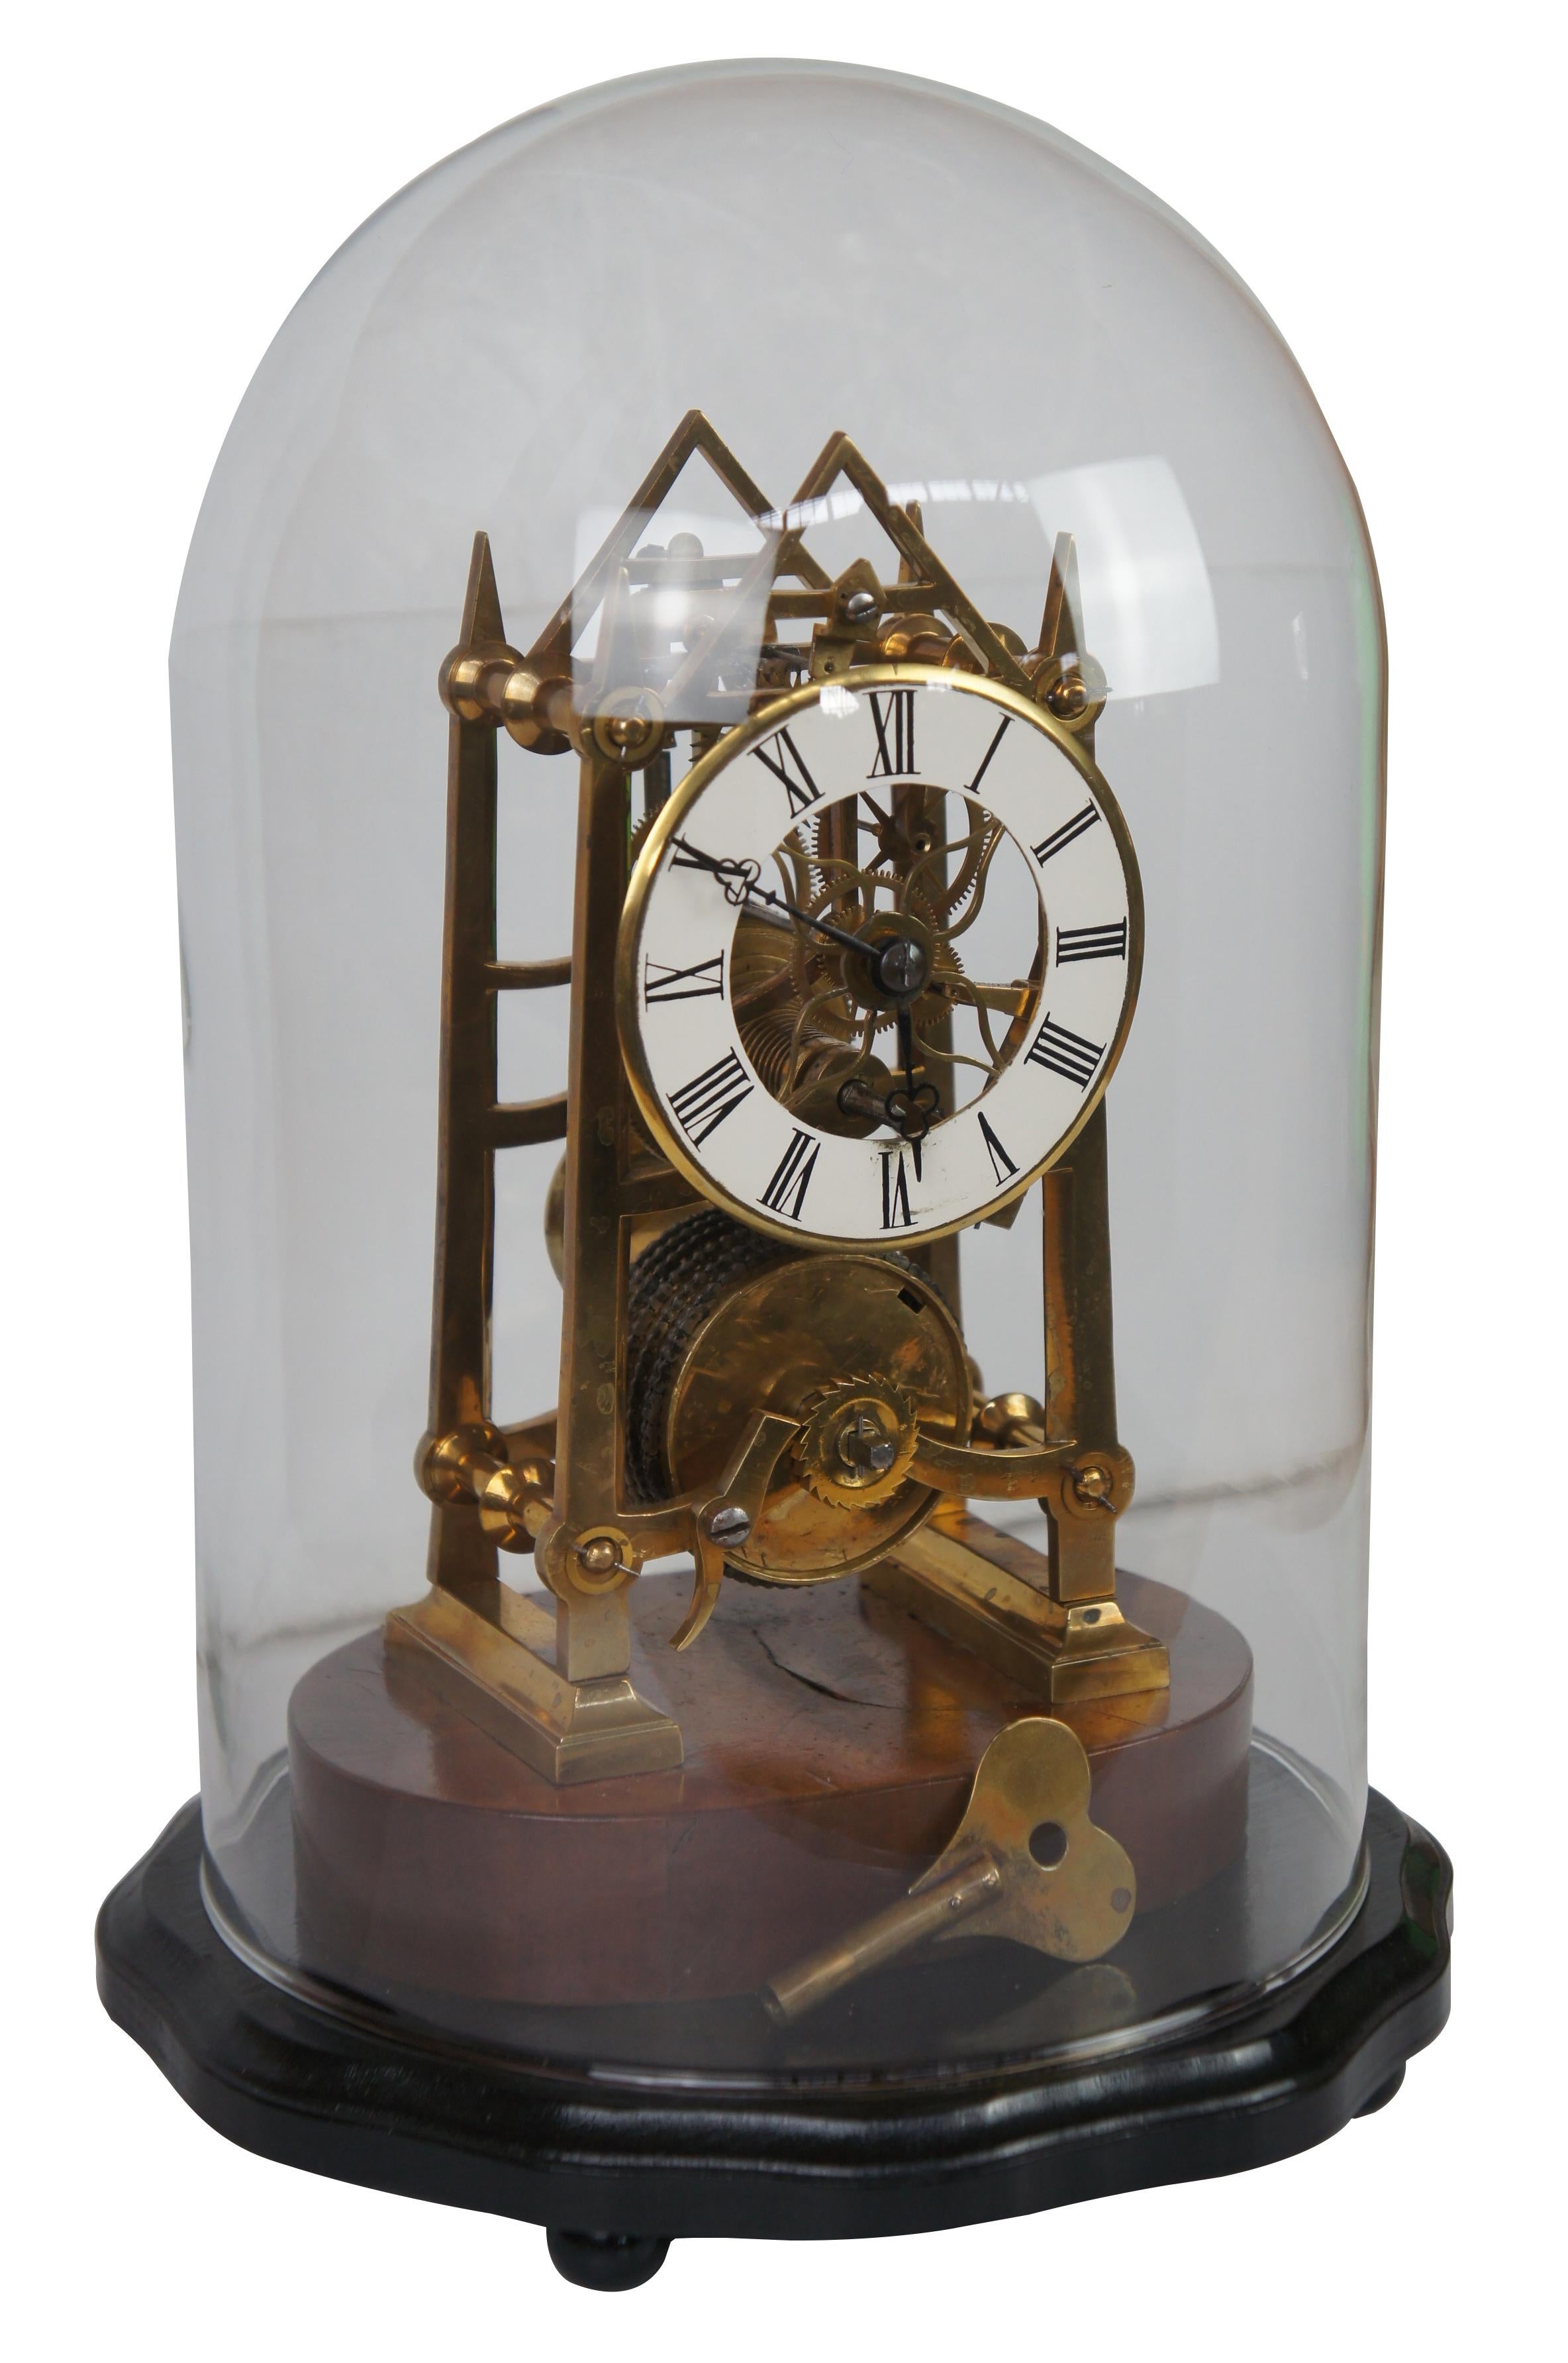 Antique mid 19th century 8 day skeleton clock. Centrally mounted on wood base featuring exposed Fusee movement and protected from dust by a glass dome.
 